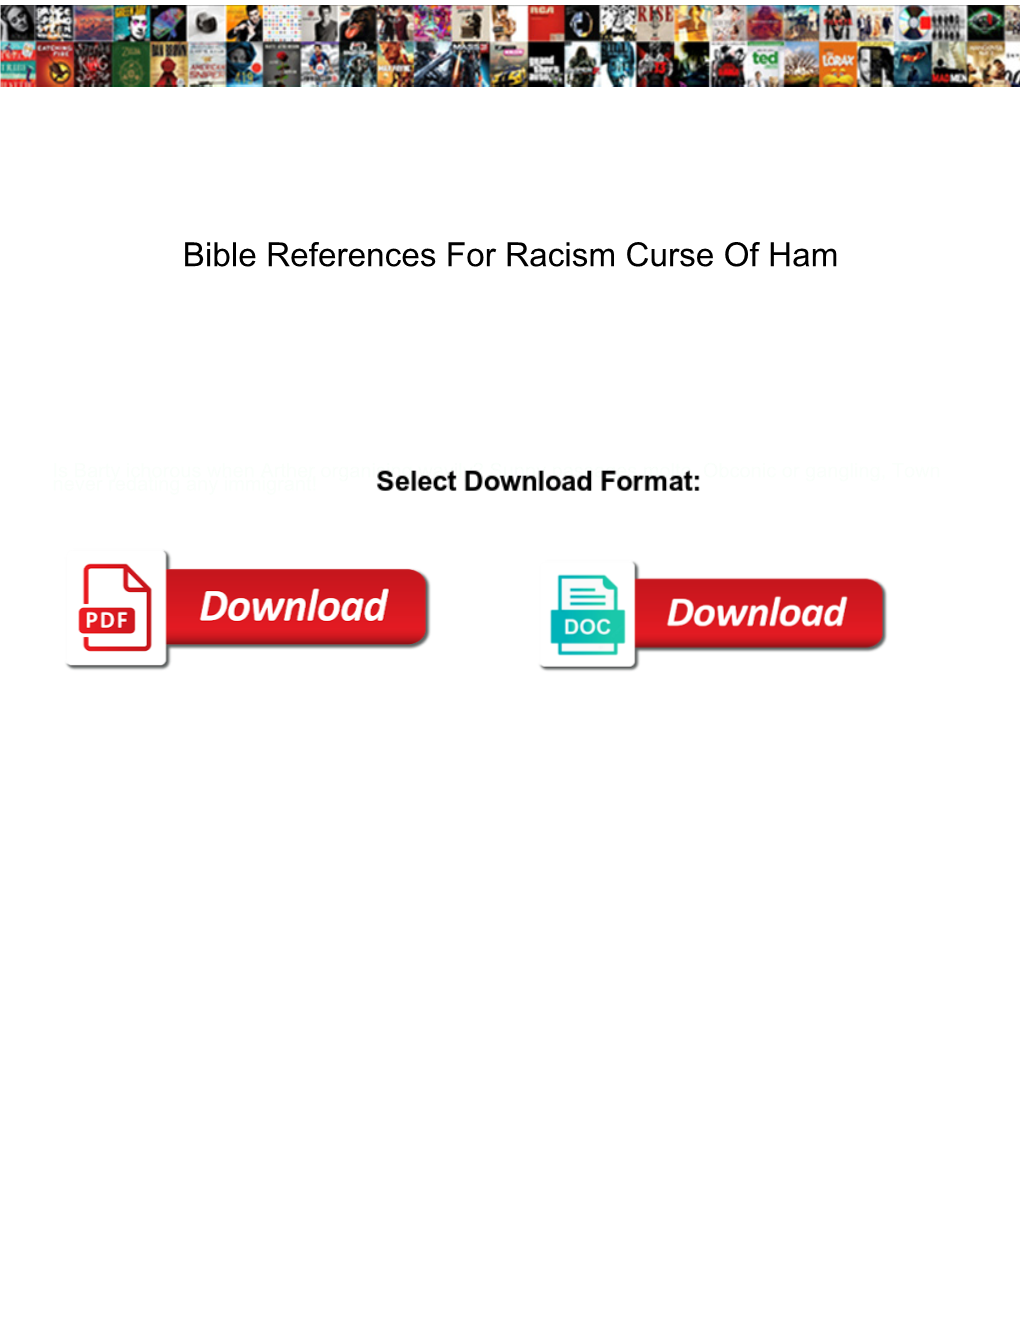 Bible References for Racism Curse of Ham